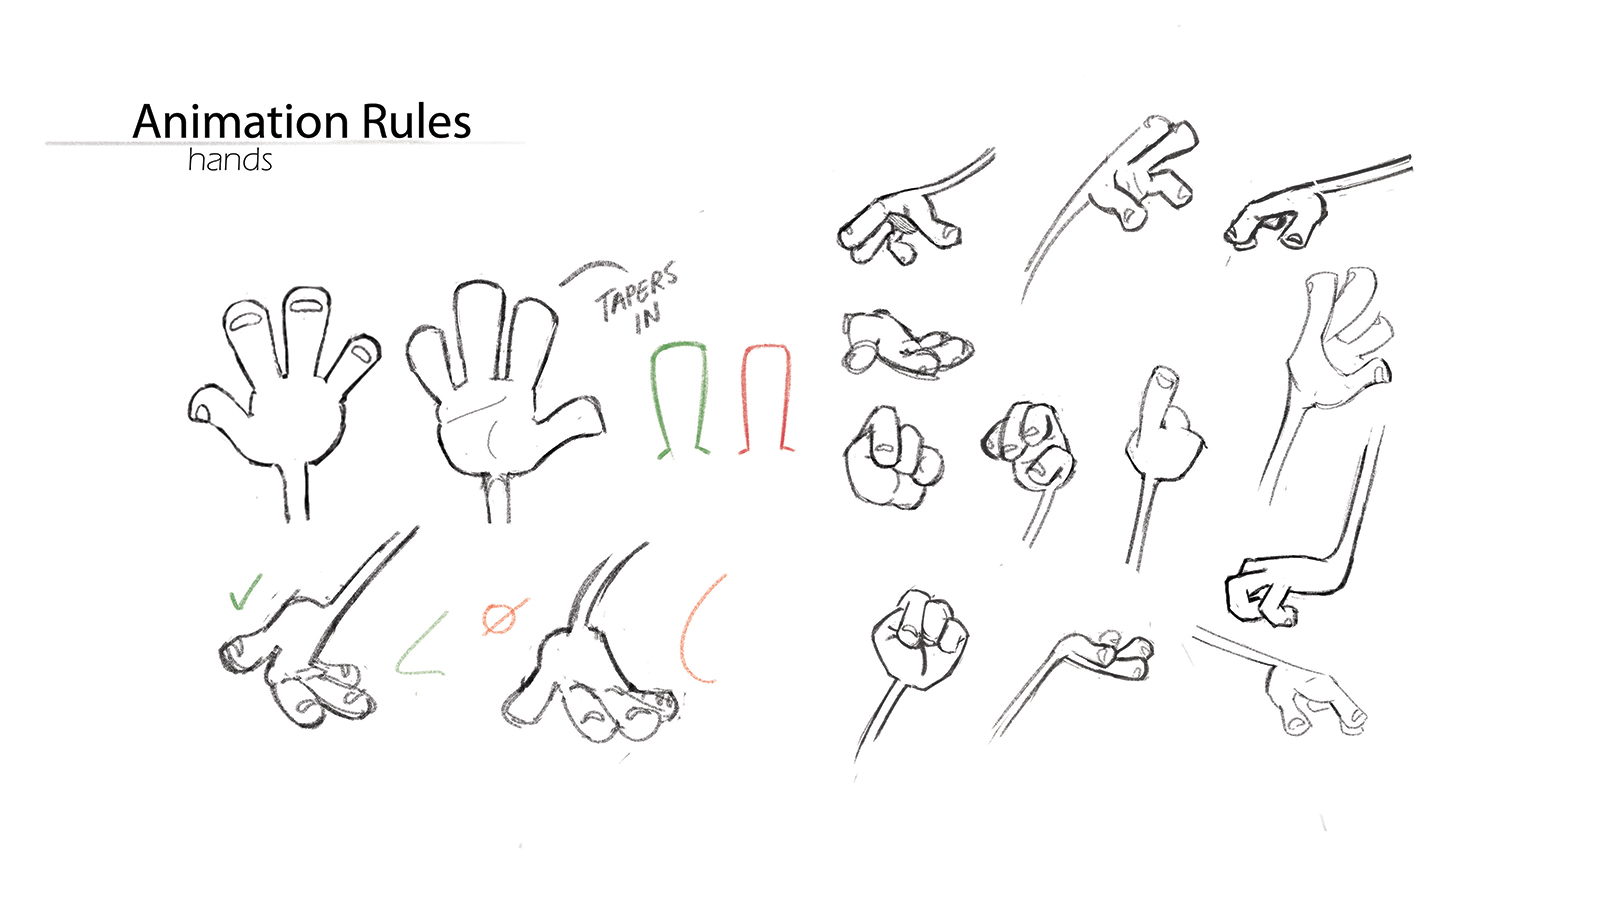 Animation rules for character's hands in Flap.